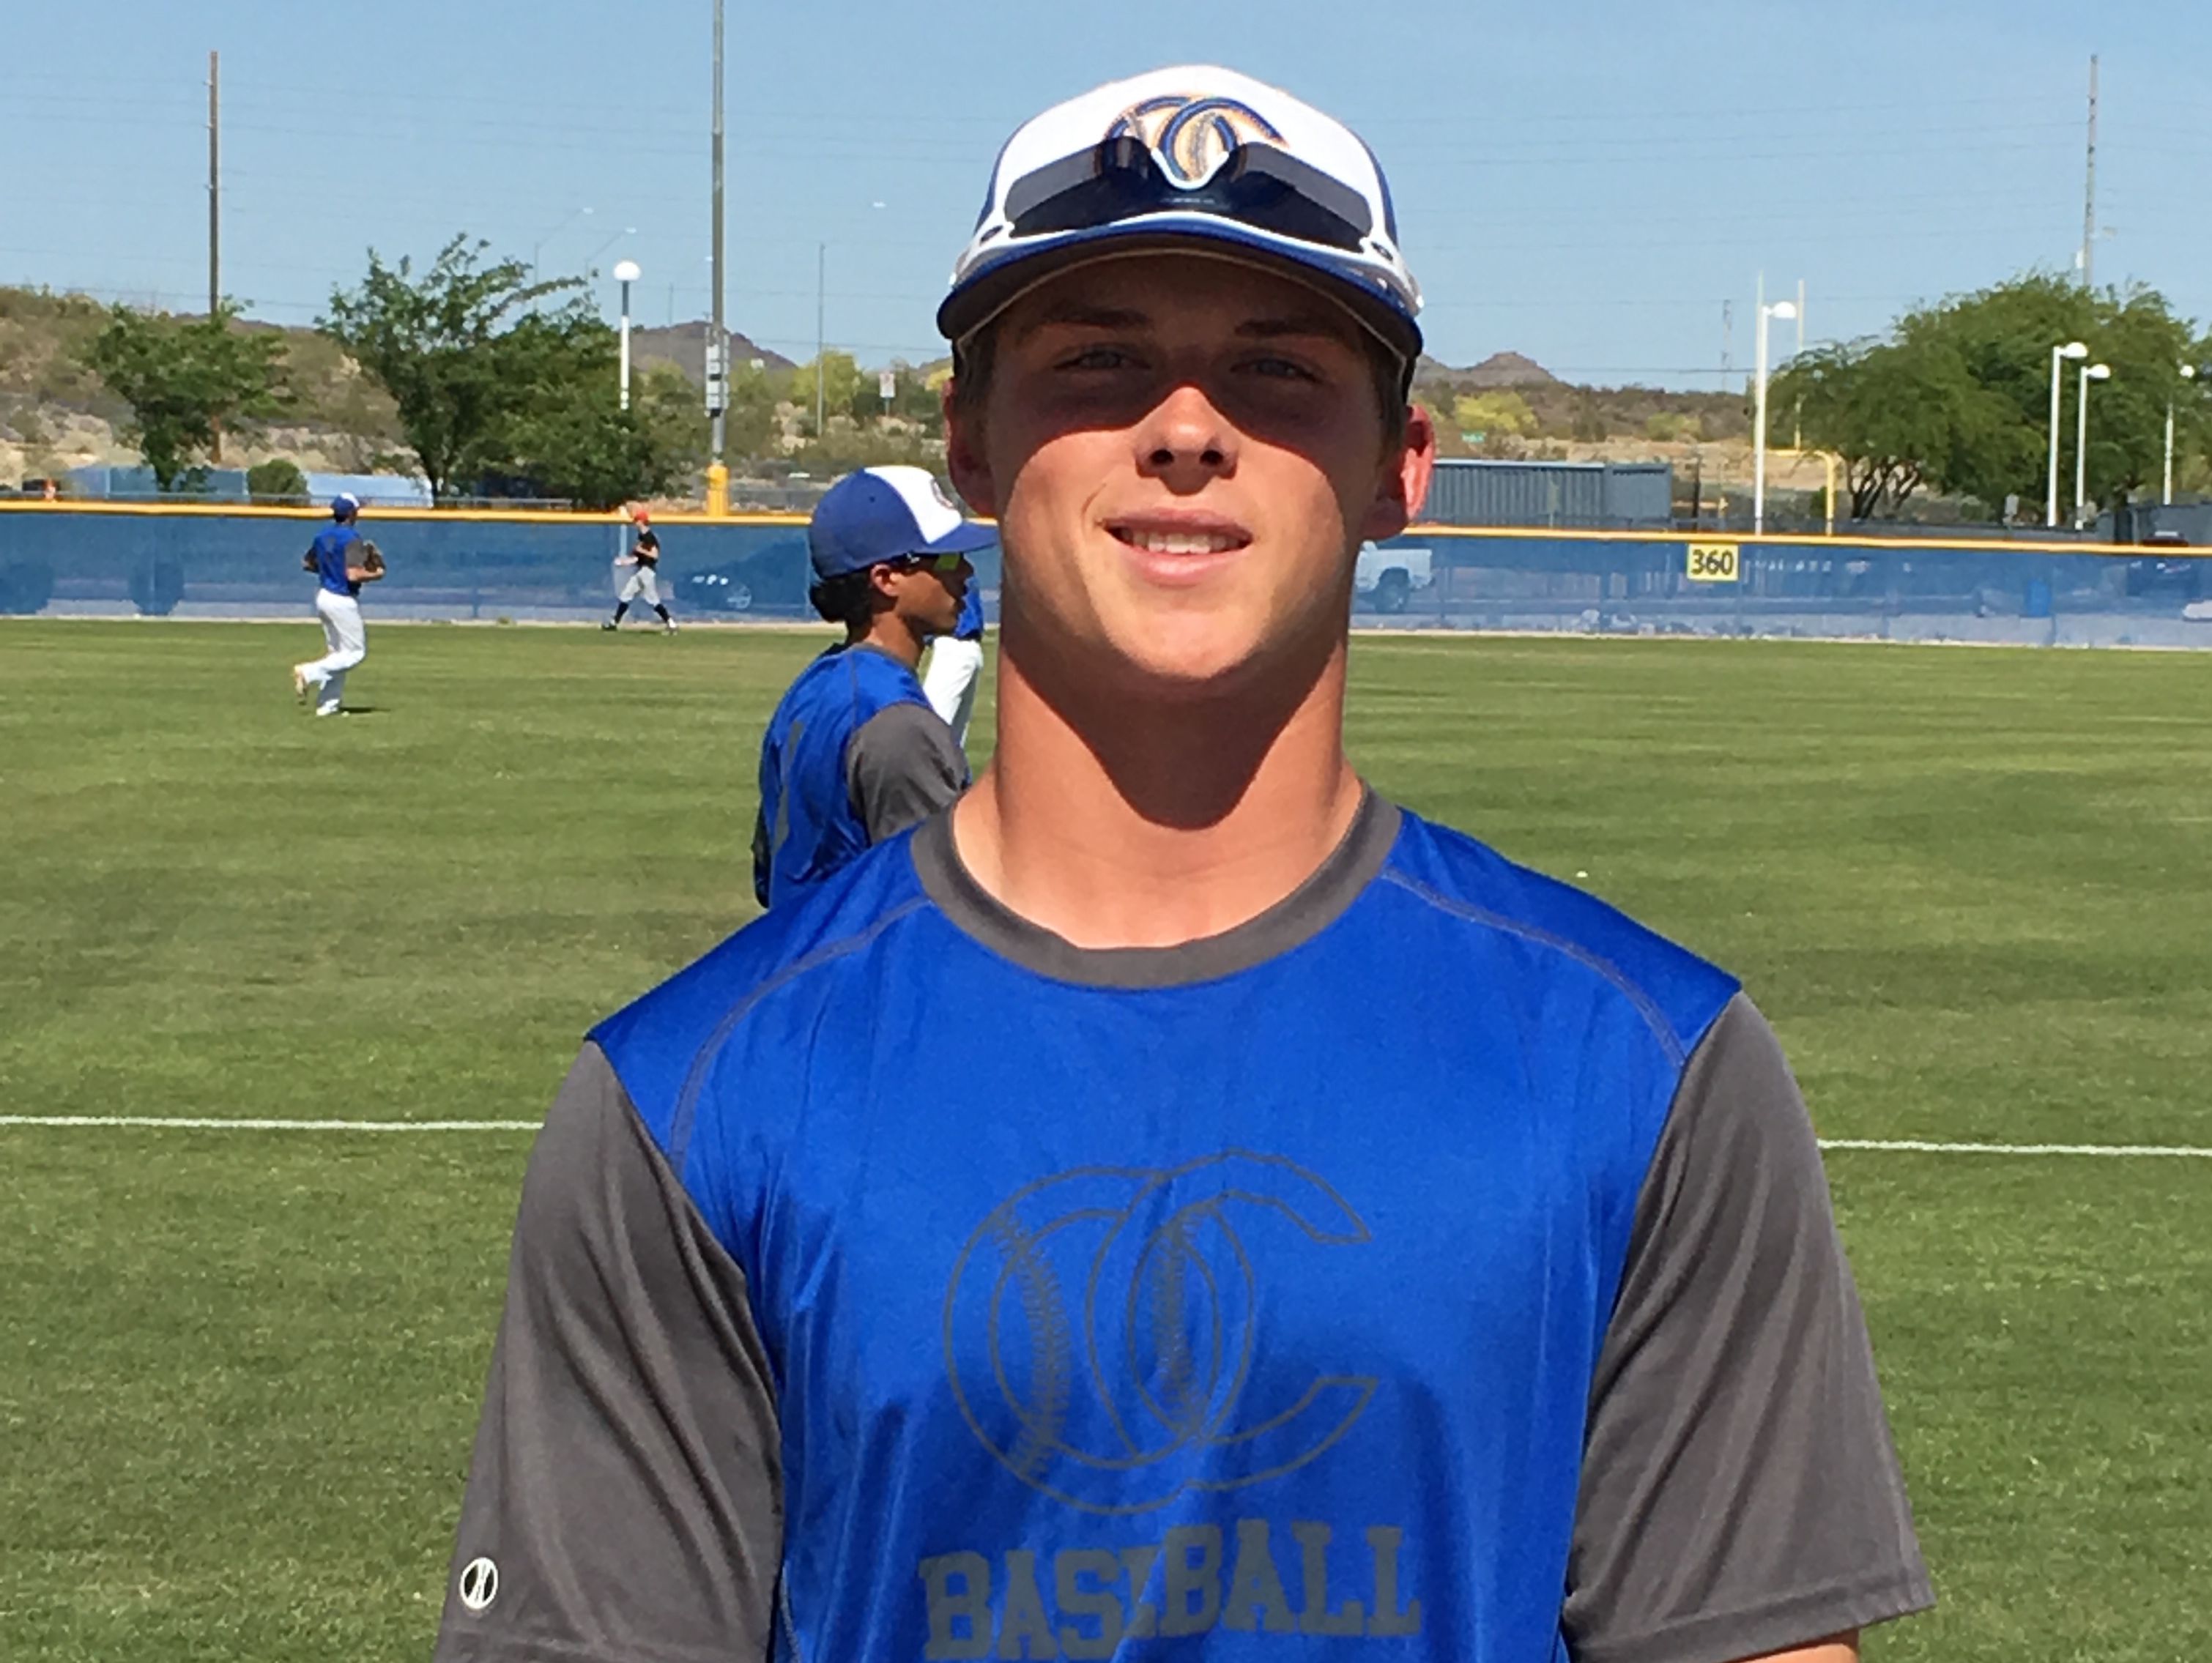 Nolan Gorman, from Phoenix Sandra Day O'Connor, is azcentral sports' Male Athlete of the Week, presented by La-Z-Boy Furniture Galleries, from April 14-21.